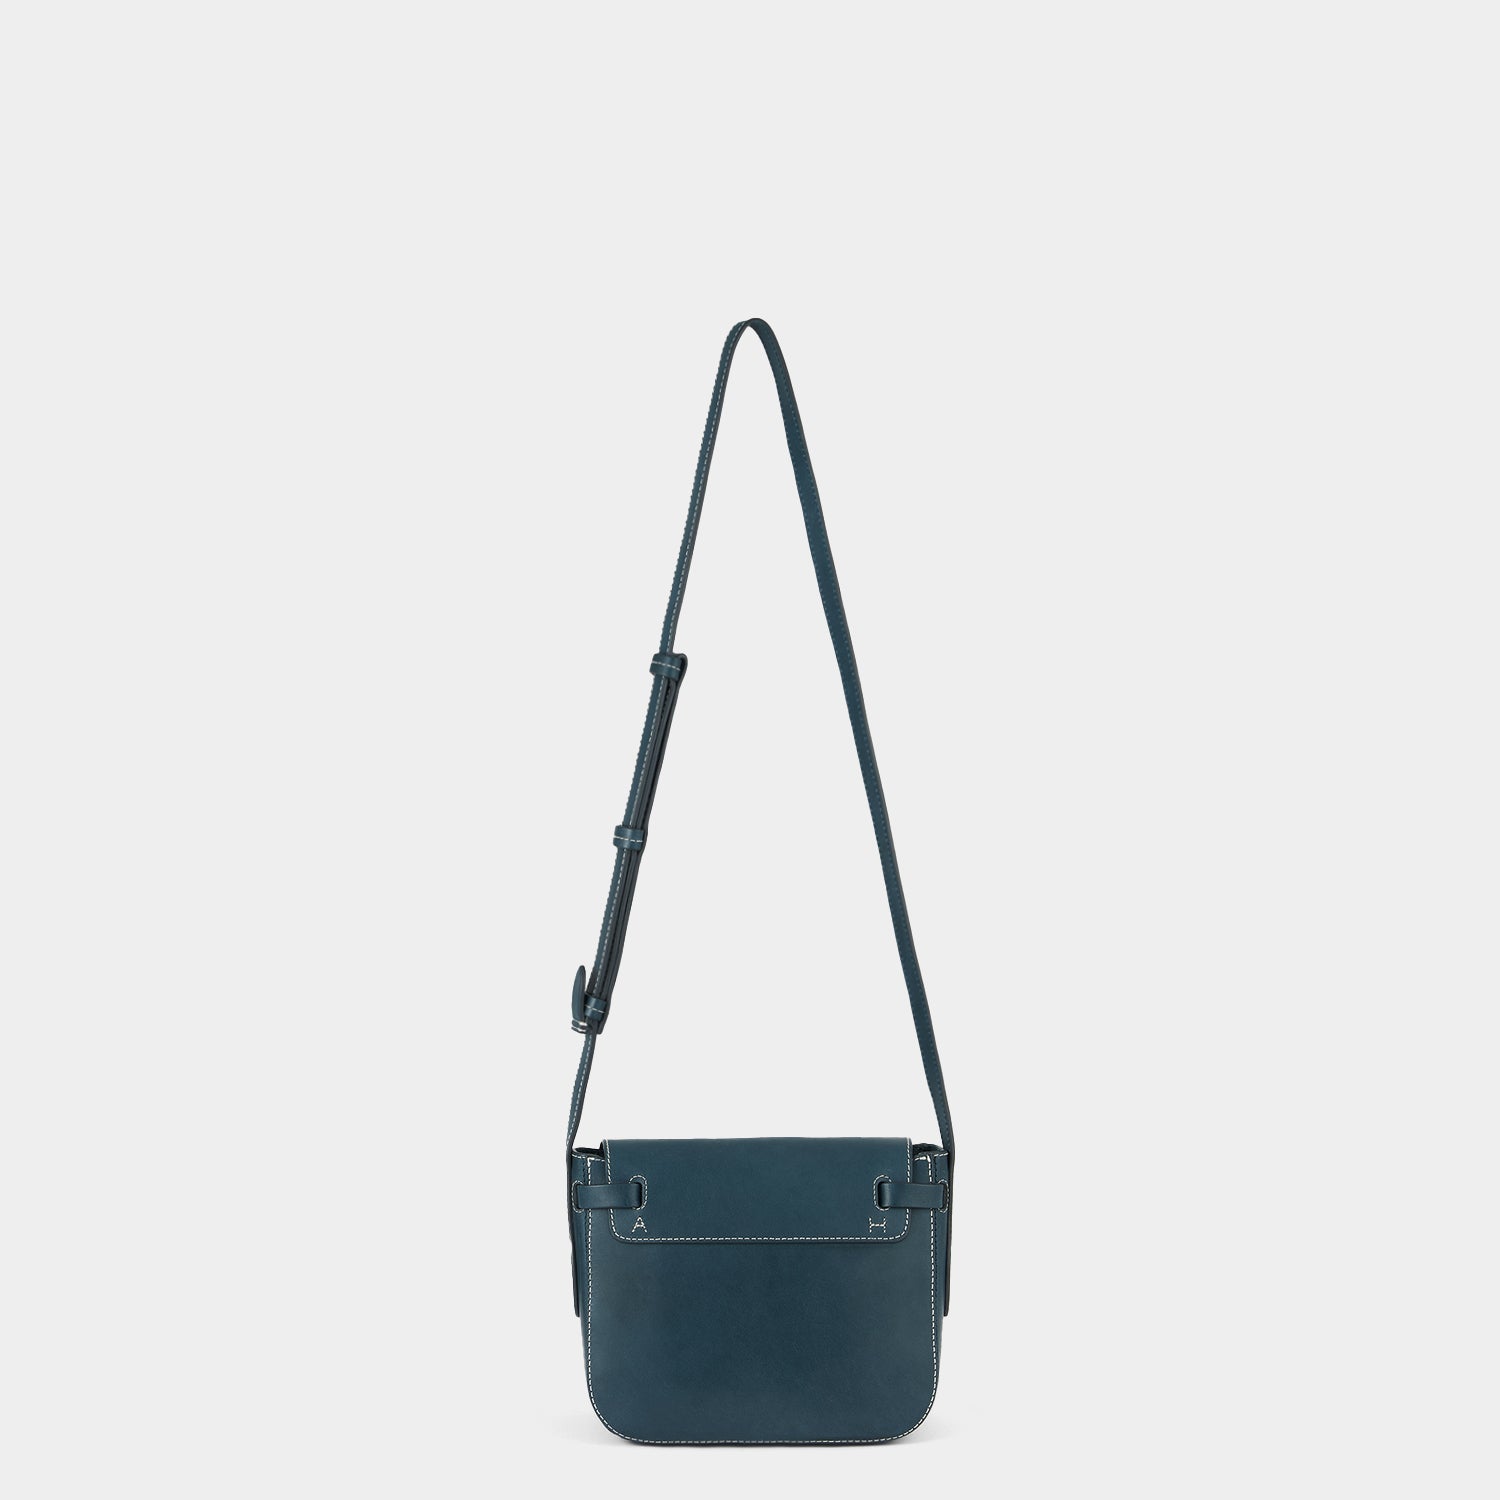 Return to Nature Cross-body -

                  
                    Compostable Leather in Dark Holly -
                  

                  Anya Hindmarch US
